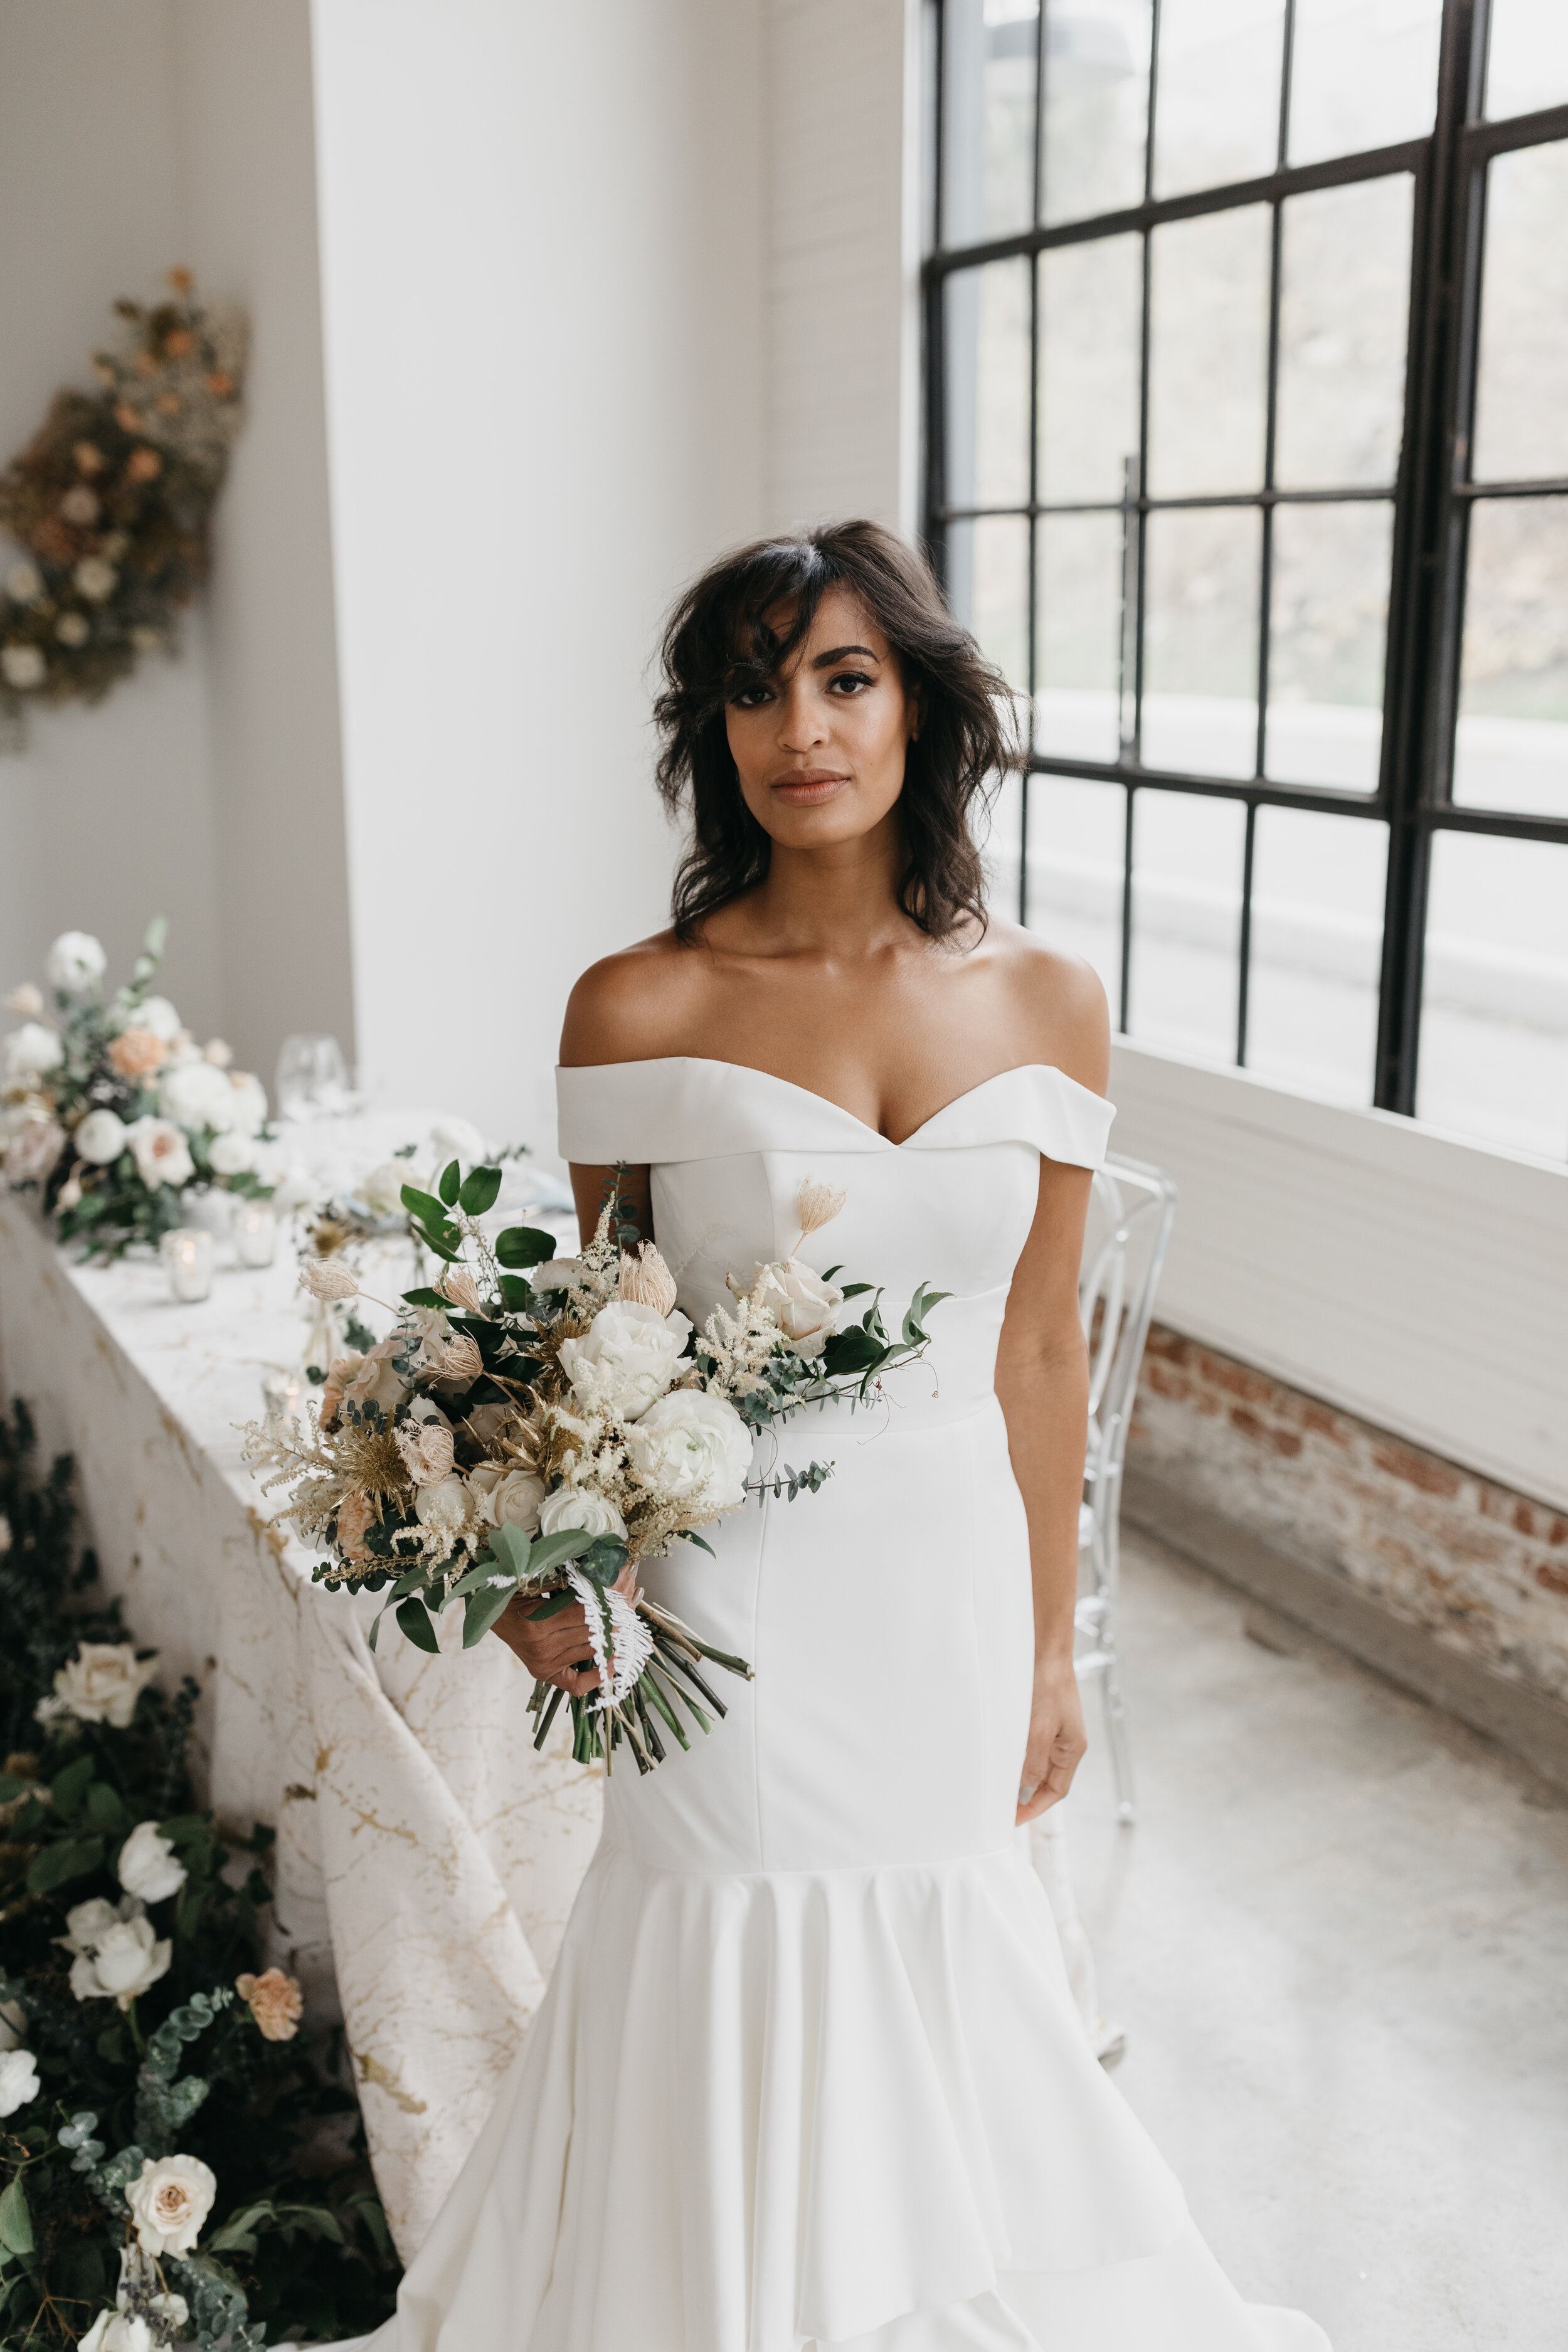 Wintery bouquet filled with fresh and dried florals, white roses, quicksand roses, astilbe, baby eucalyptus, lush greenery, and touches of gold. Nashville wedding florist Rosemary & Finch at OZARI.